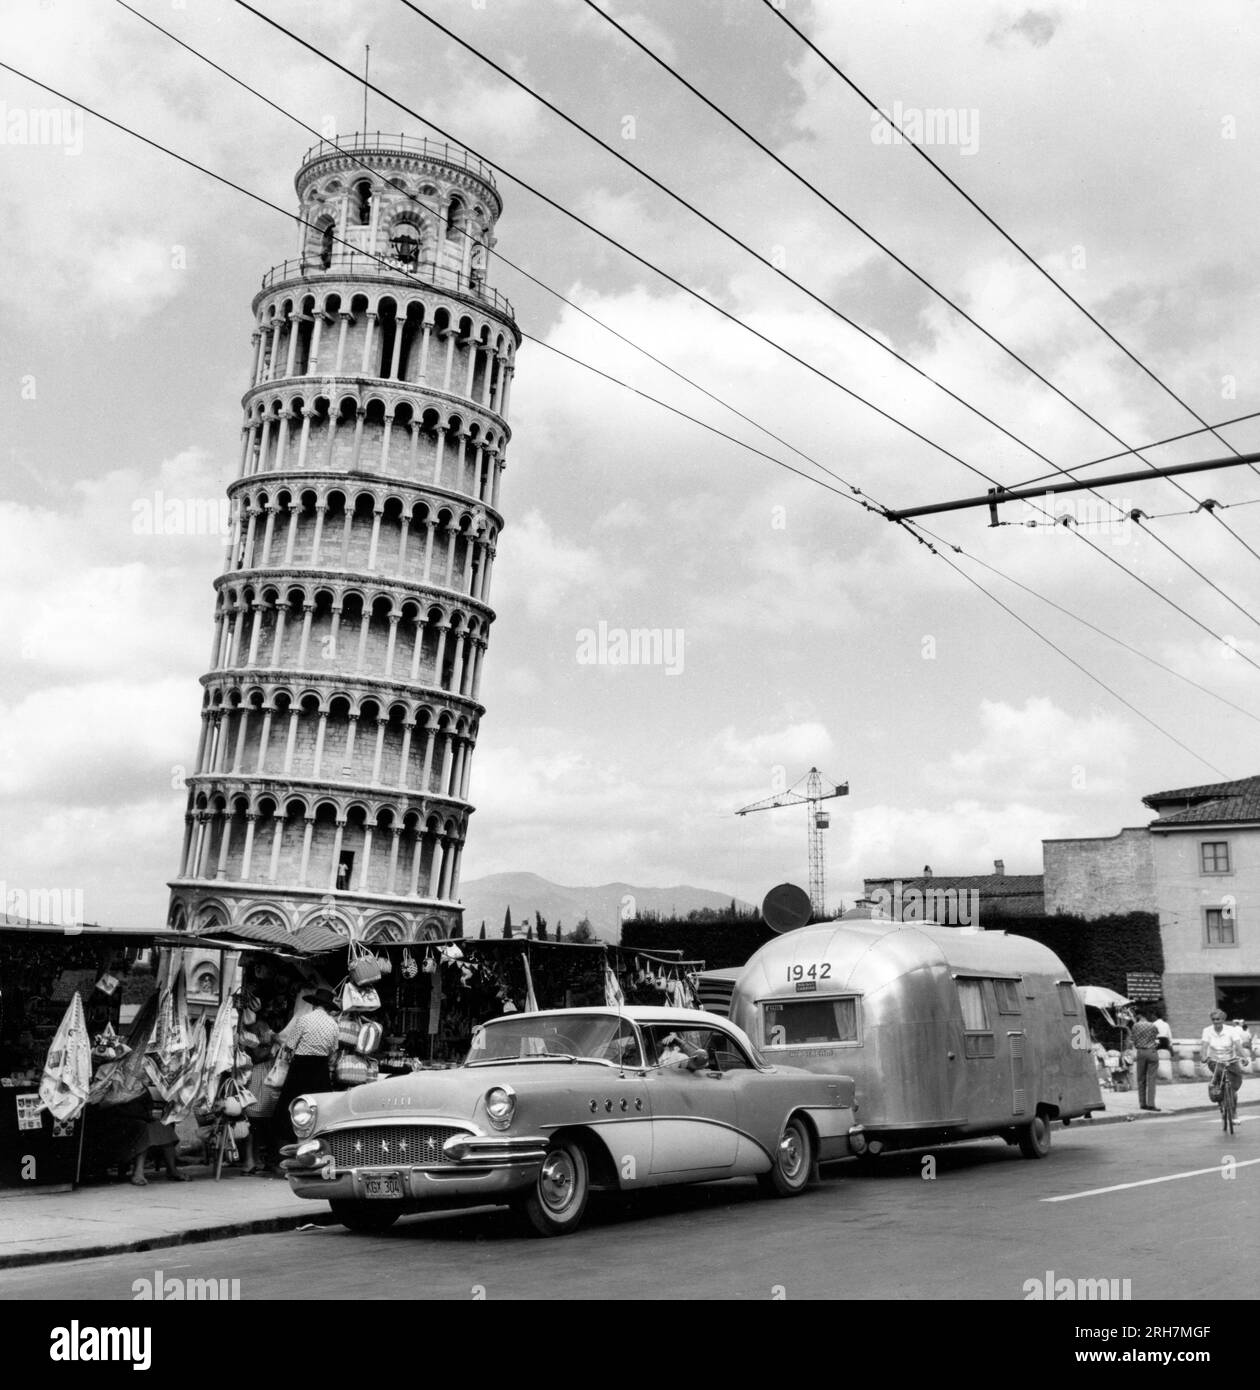 Buick pulling an Airstream Trailer in Pisa, Italy as part of a Wally Byam 1956 European Caravan. Stock Photo